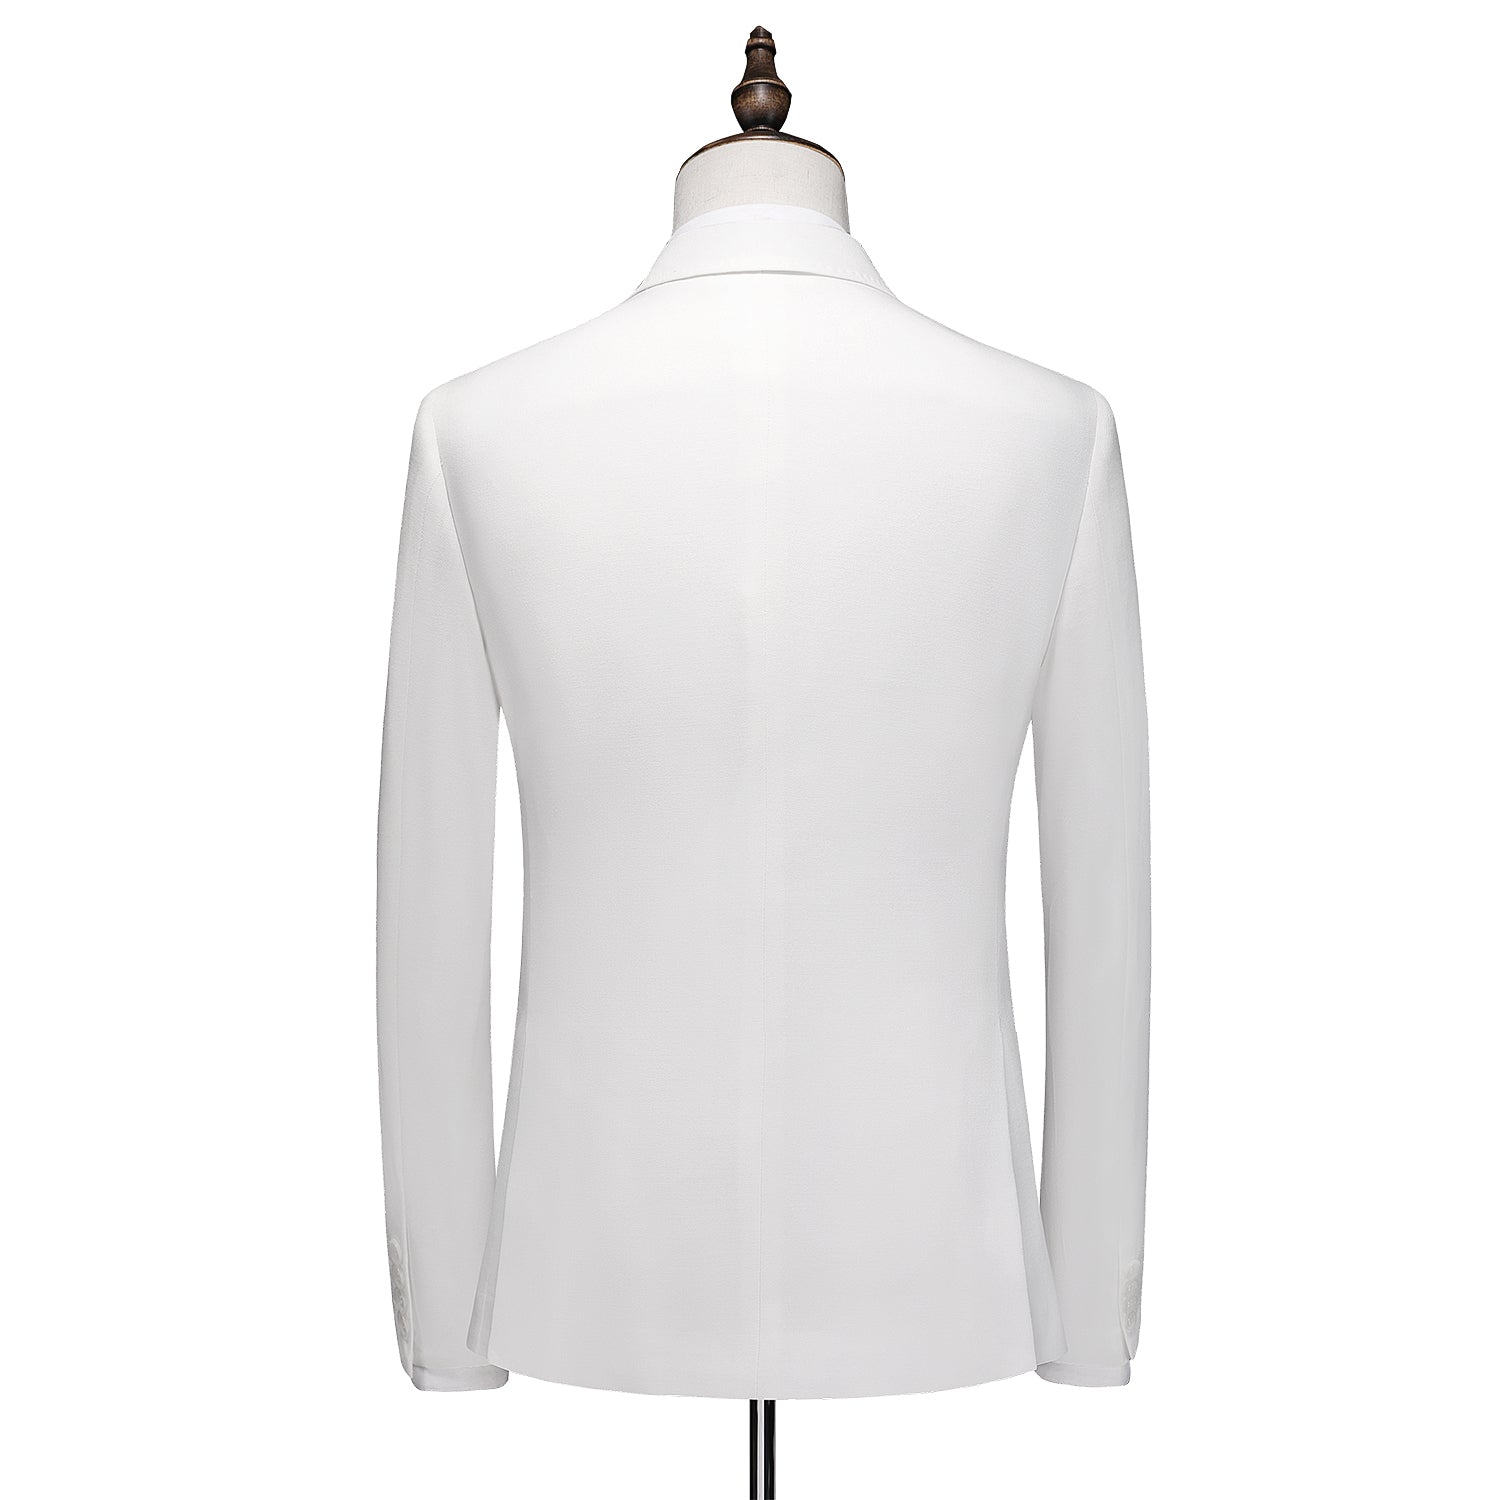 Men's 2 Piece Double Breasted Suit in Solid White